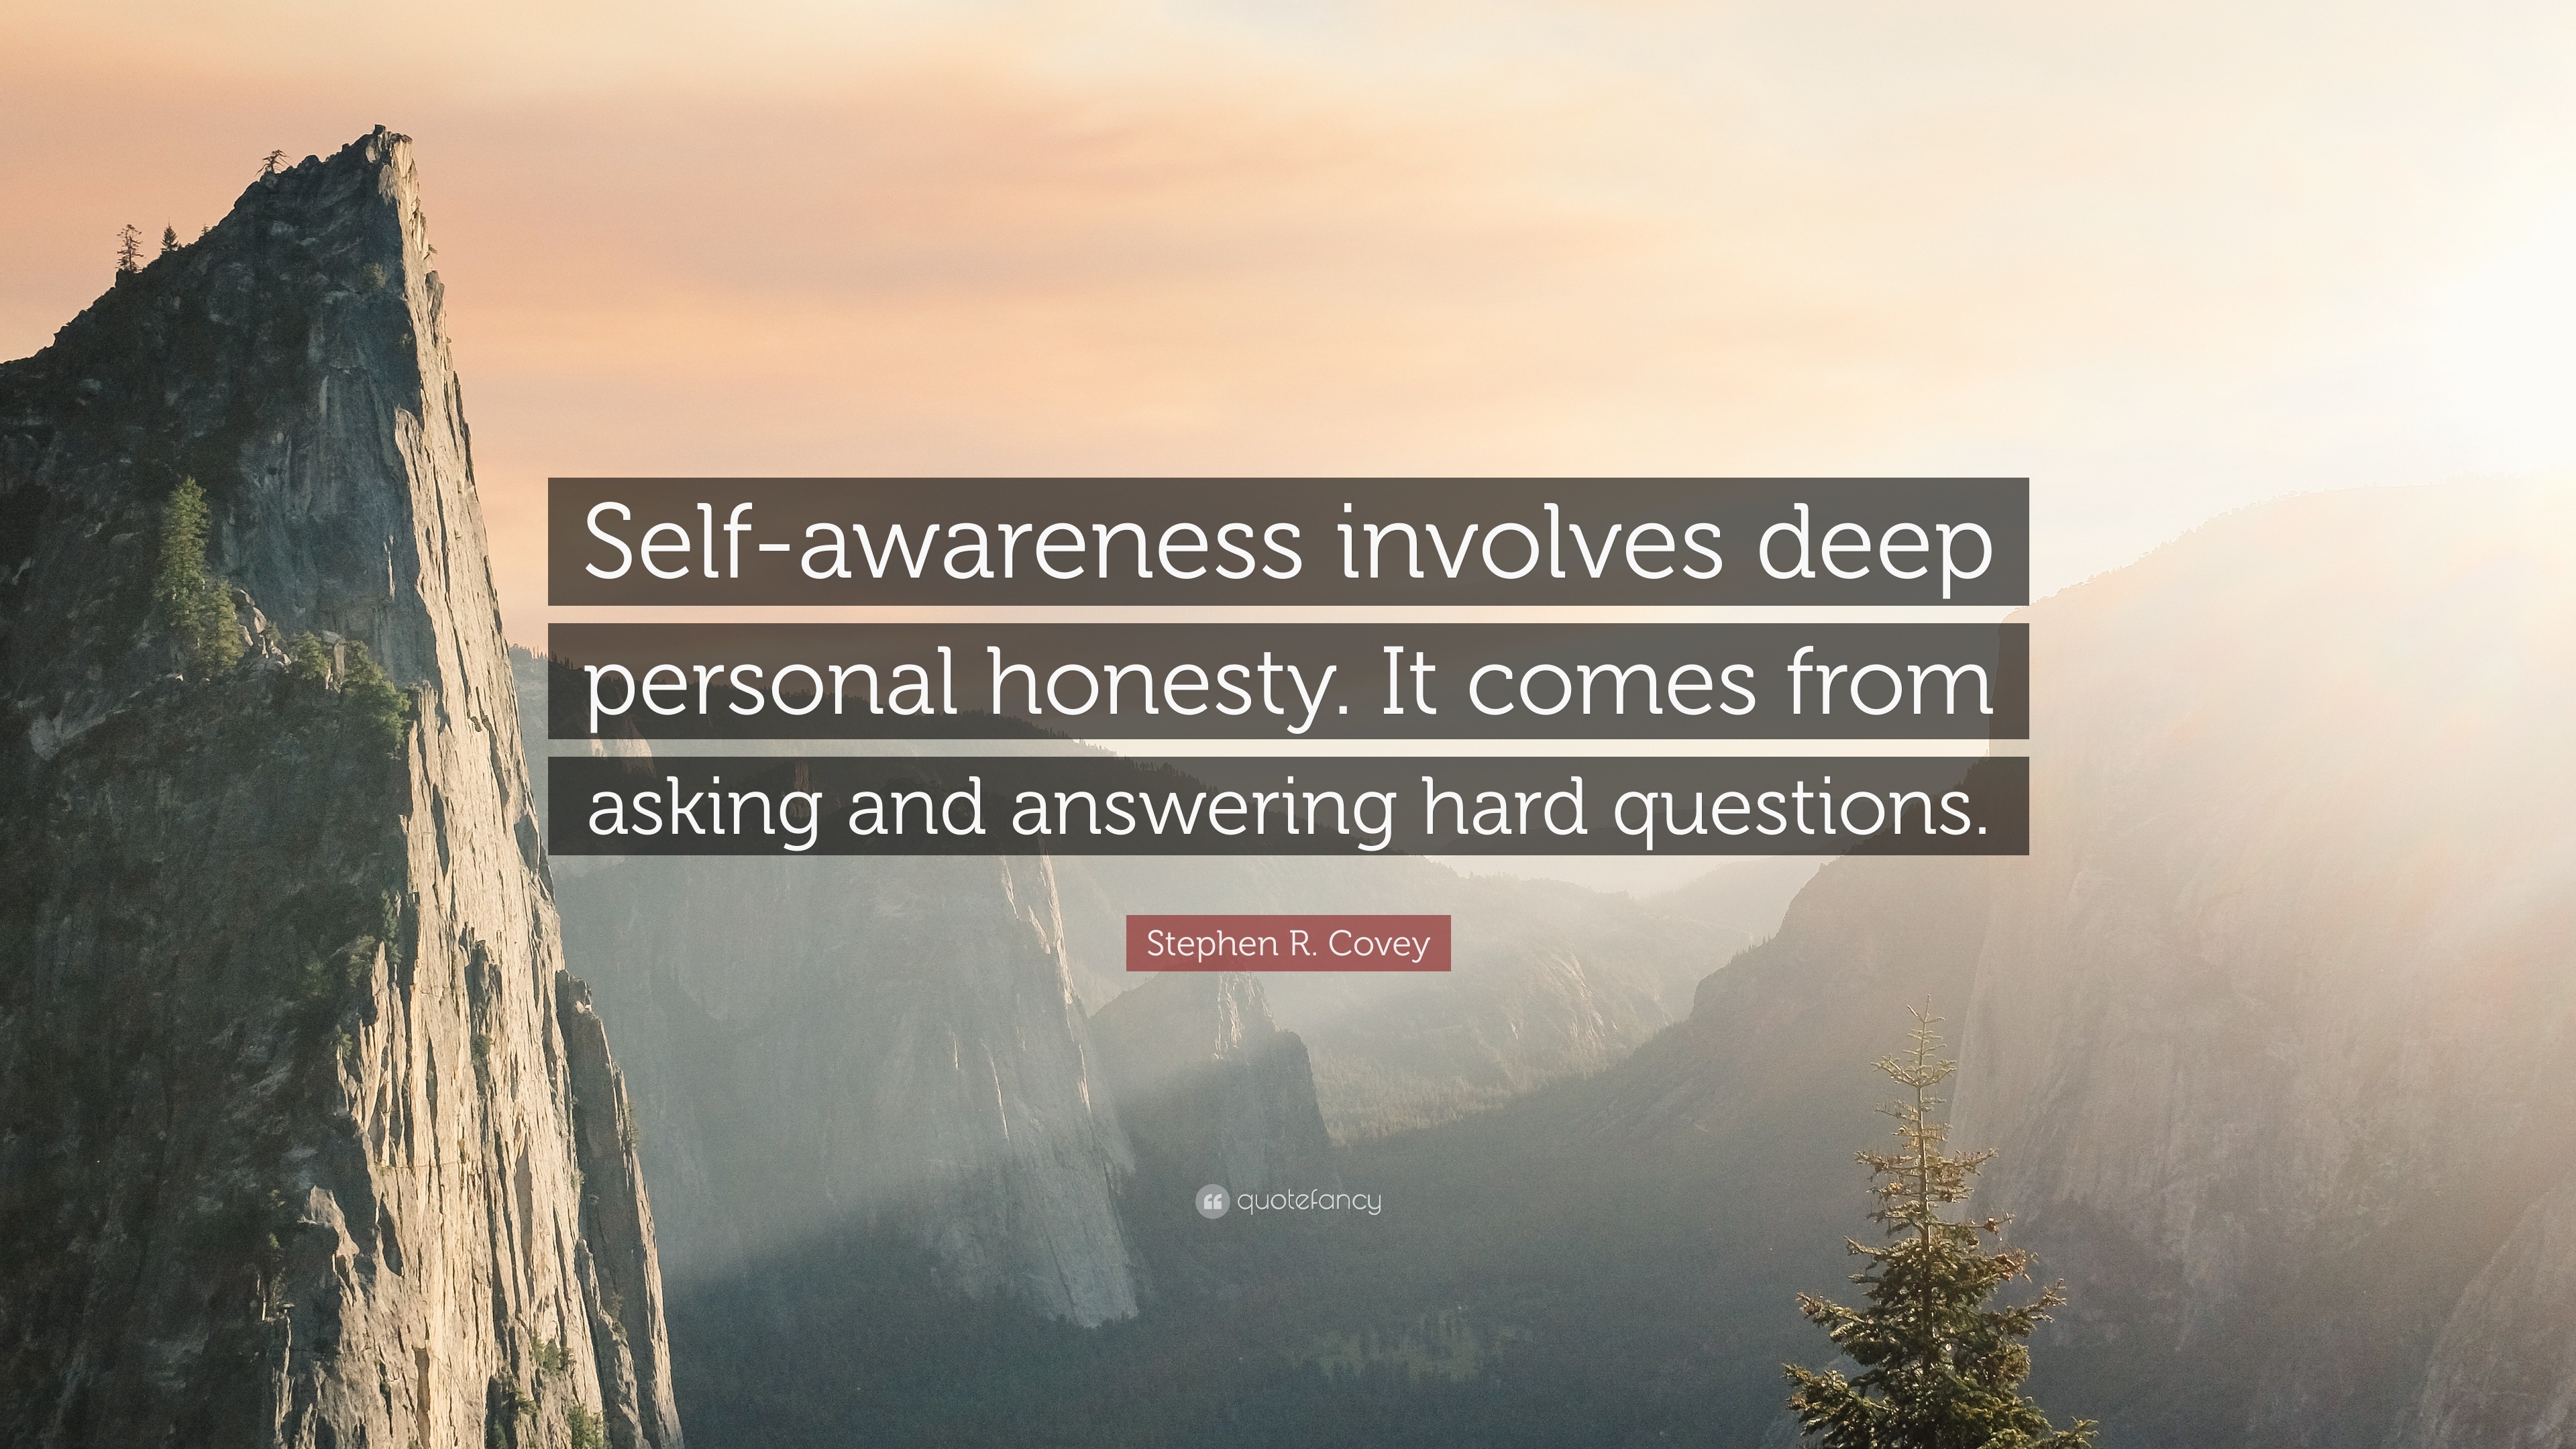 Stephen R Covey Quote Self Awareness Involves Deep Personal Honesty It Comes From Asking And Answering